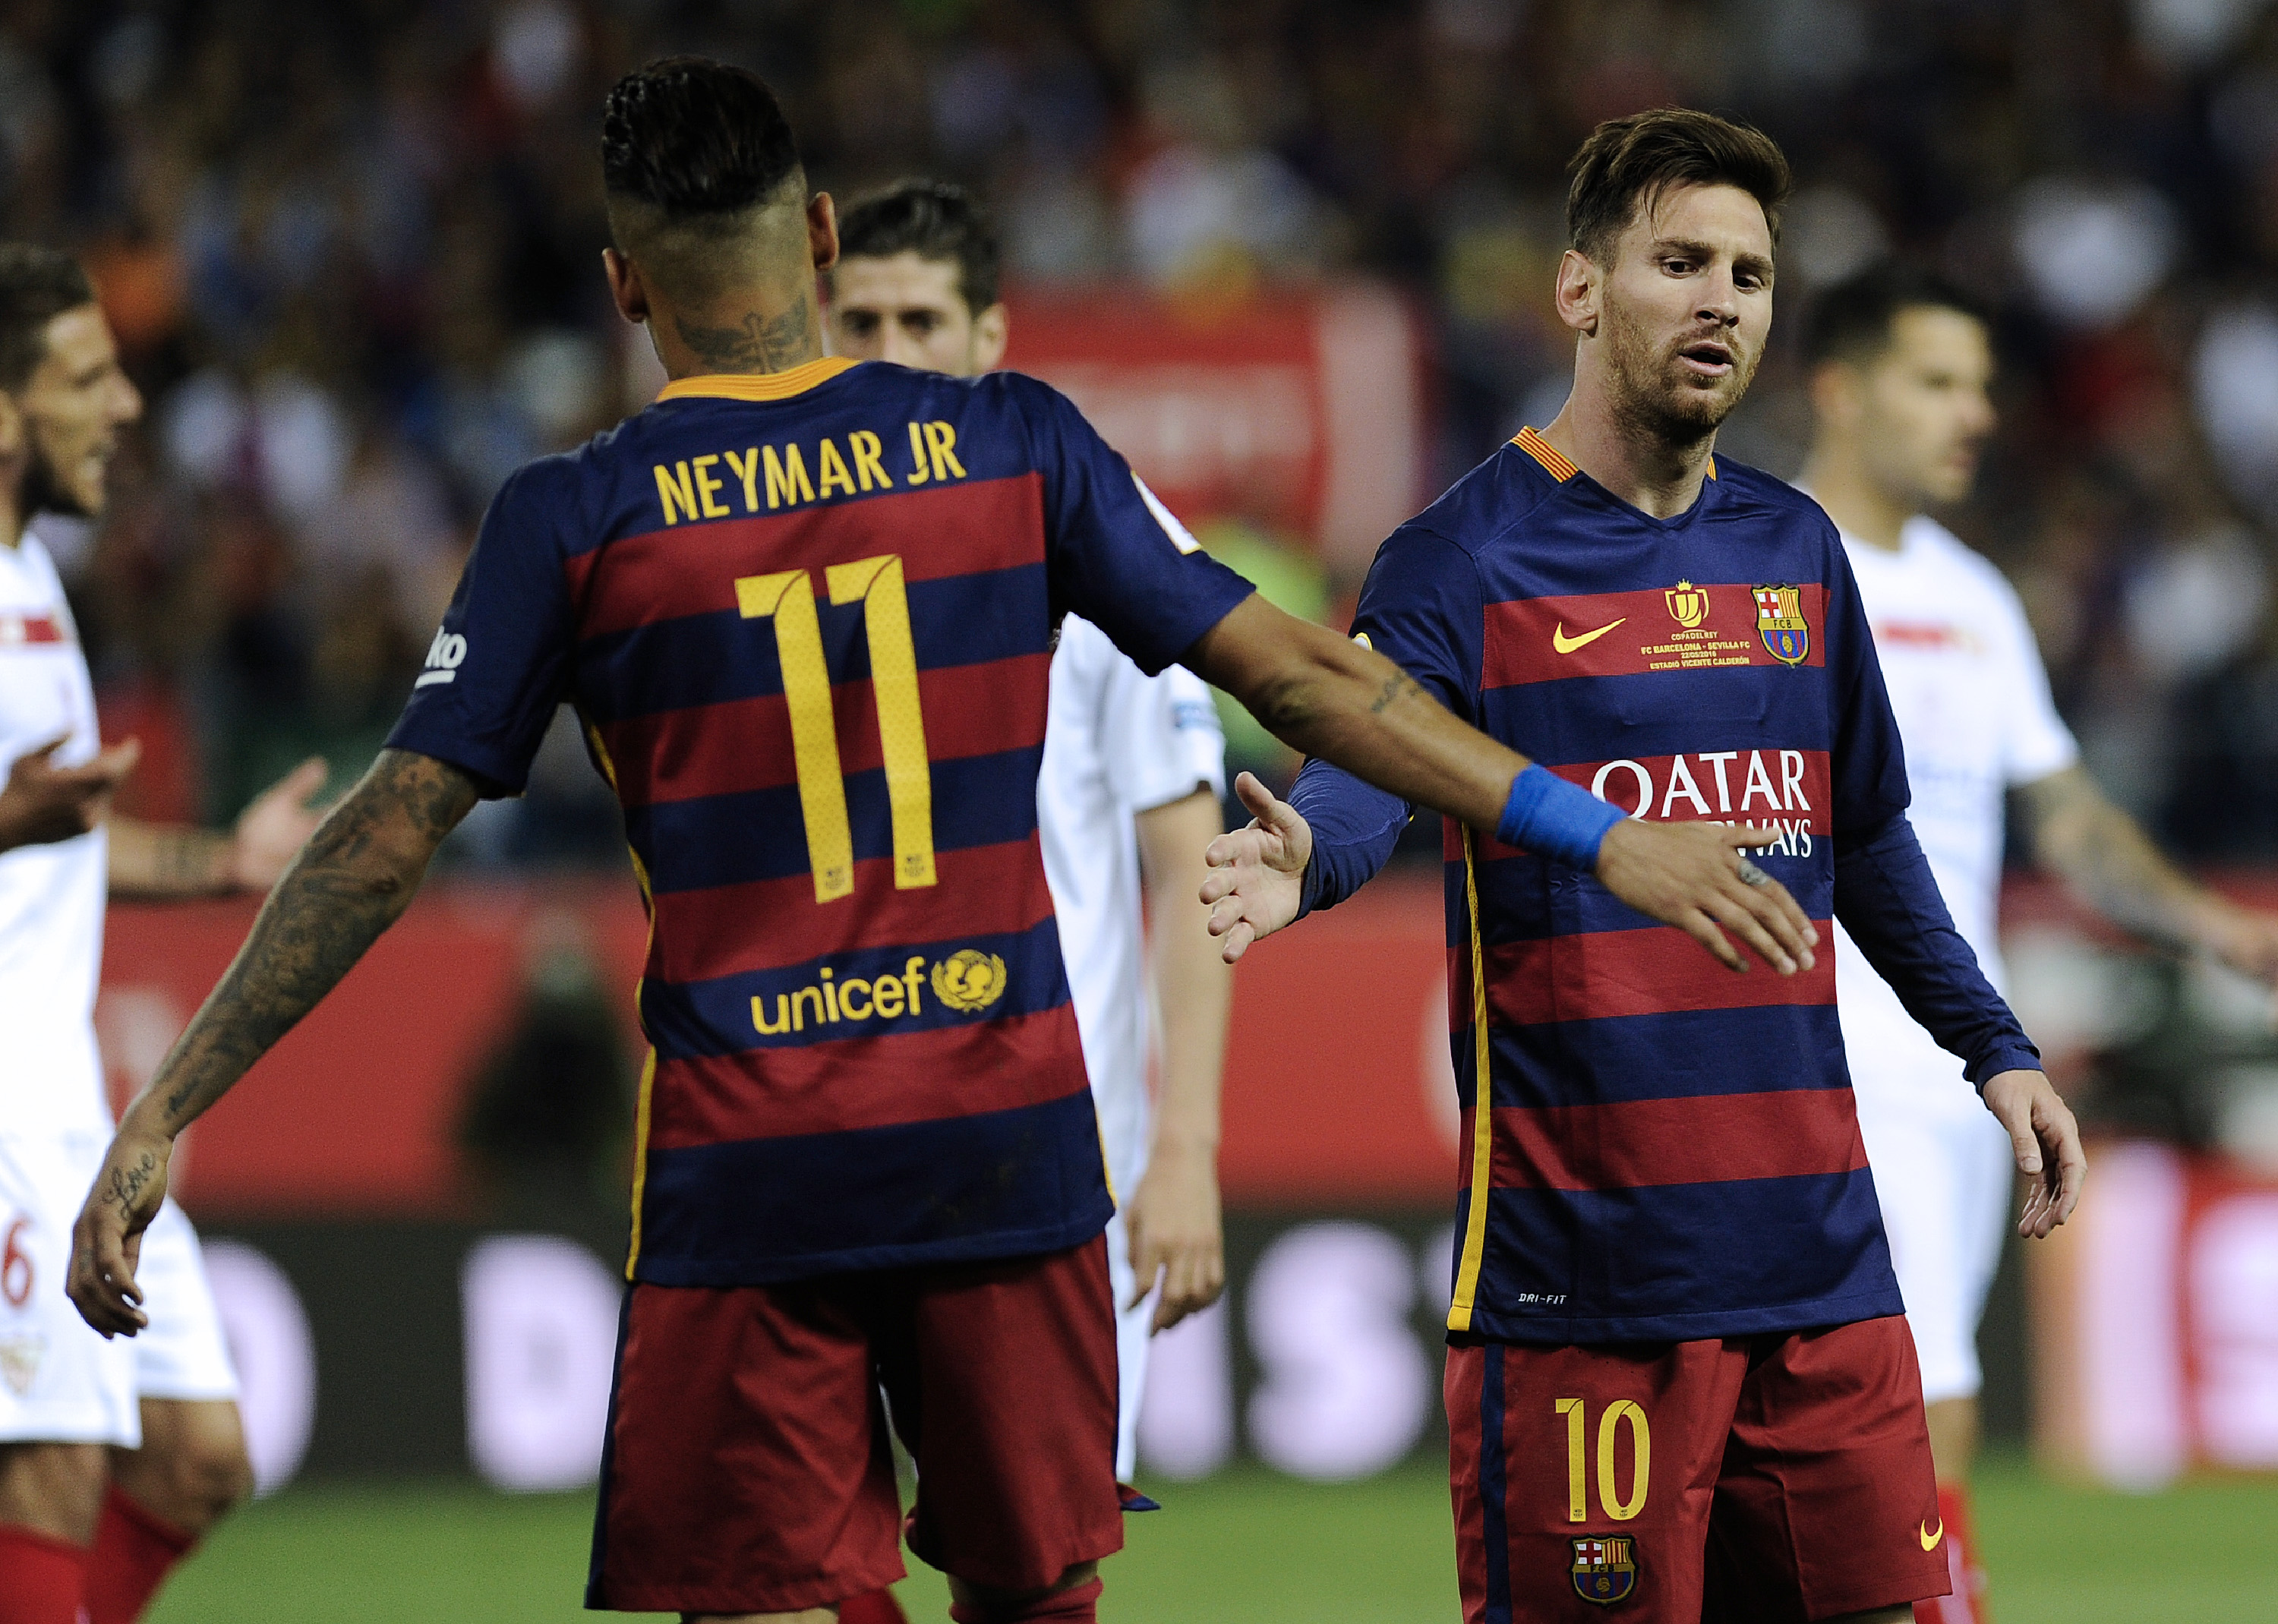 Barcelona's Brazilian forward Neymar (L) cheers Barcelona's Argentinian forward Lionel Messi during the Spanish "Copa del Rey" (King's Cup) final match FC Barcelona vs Sevilla FC at the Vicente Calderon stadium in Madrid on May 22, 2016. / AFP / CRISTINA QUICLER        (Photo credit should read CRISTINA QUICLER/AFP/Getty Images)